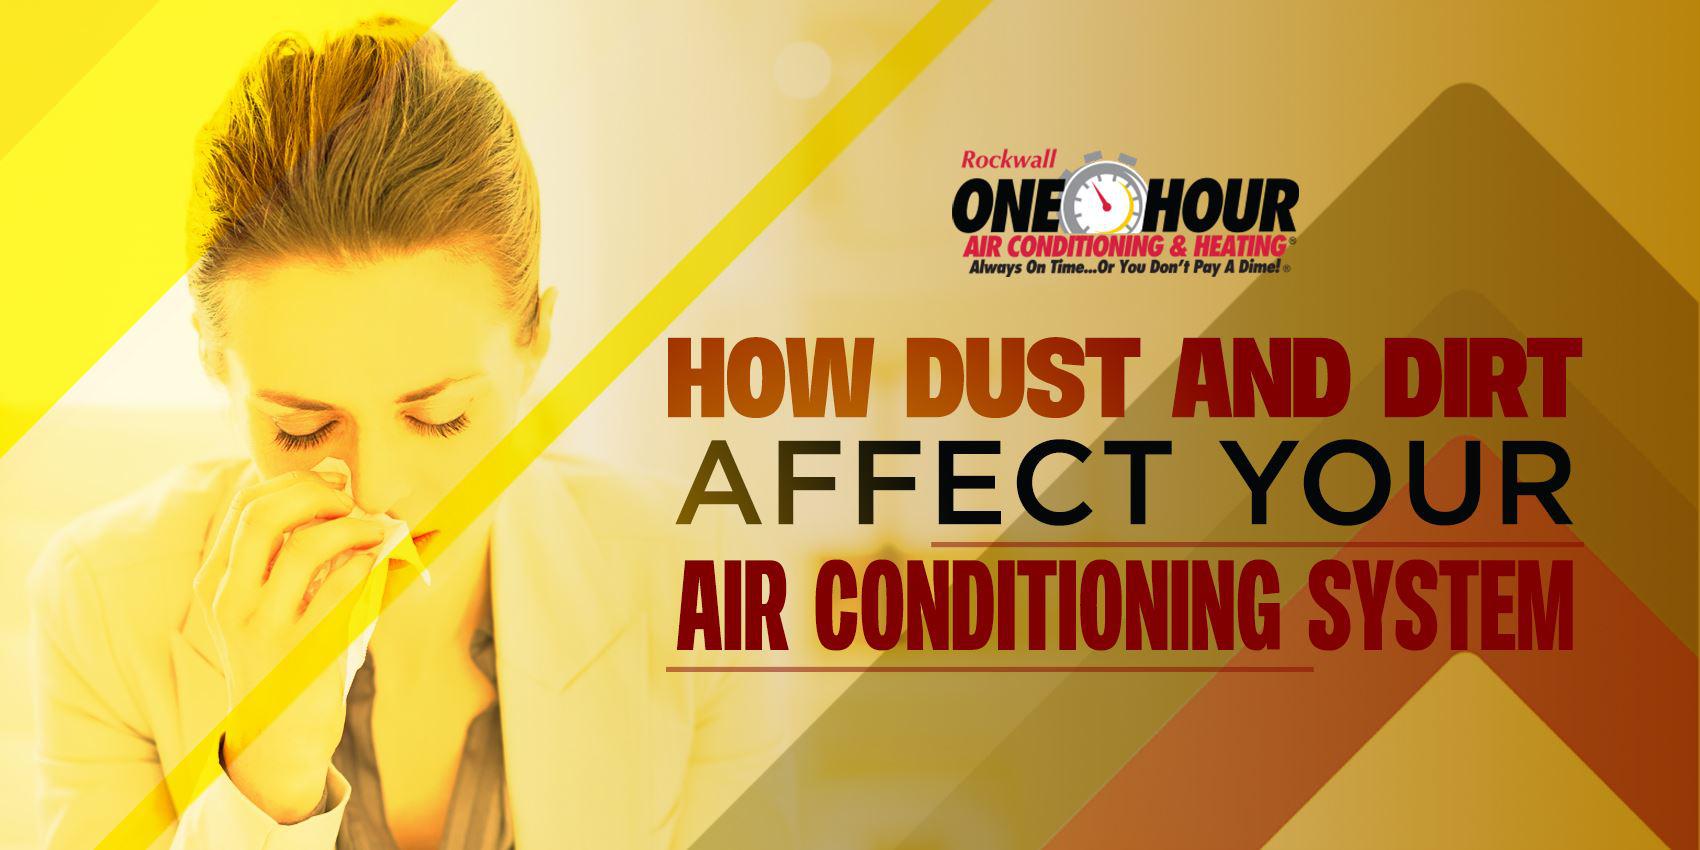 How Dust and Dirt Can Affect Your Air Conditioning System